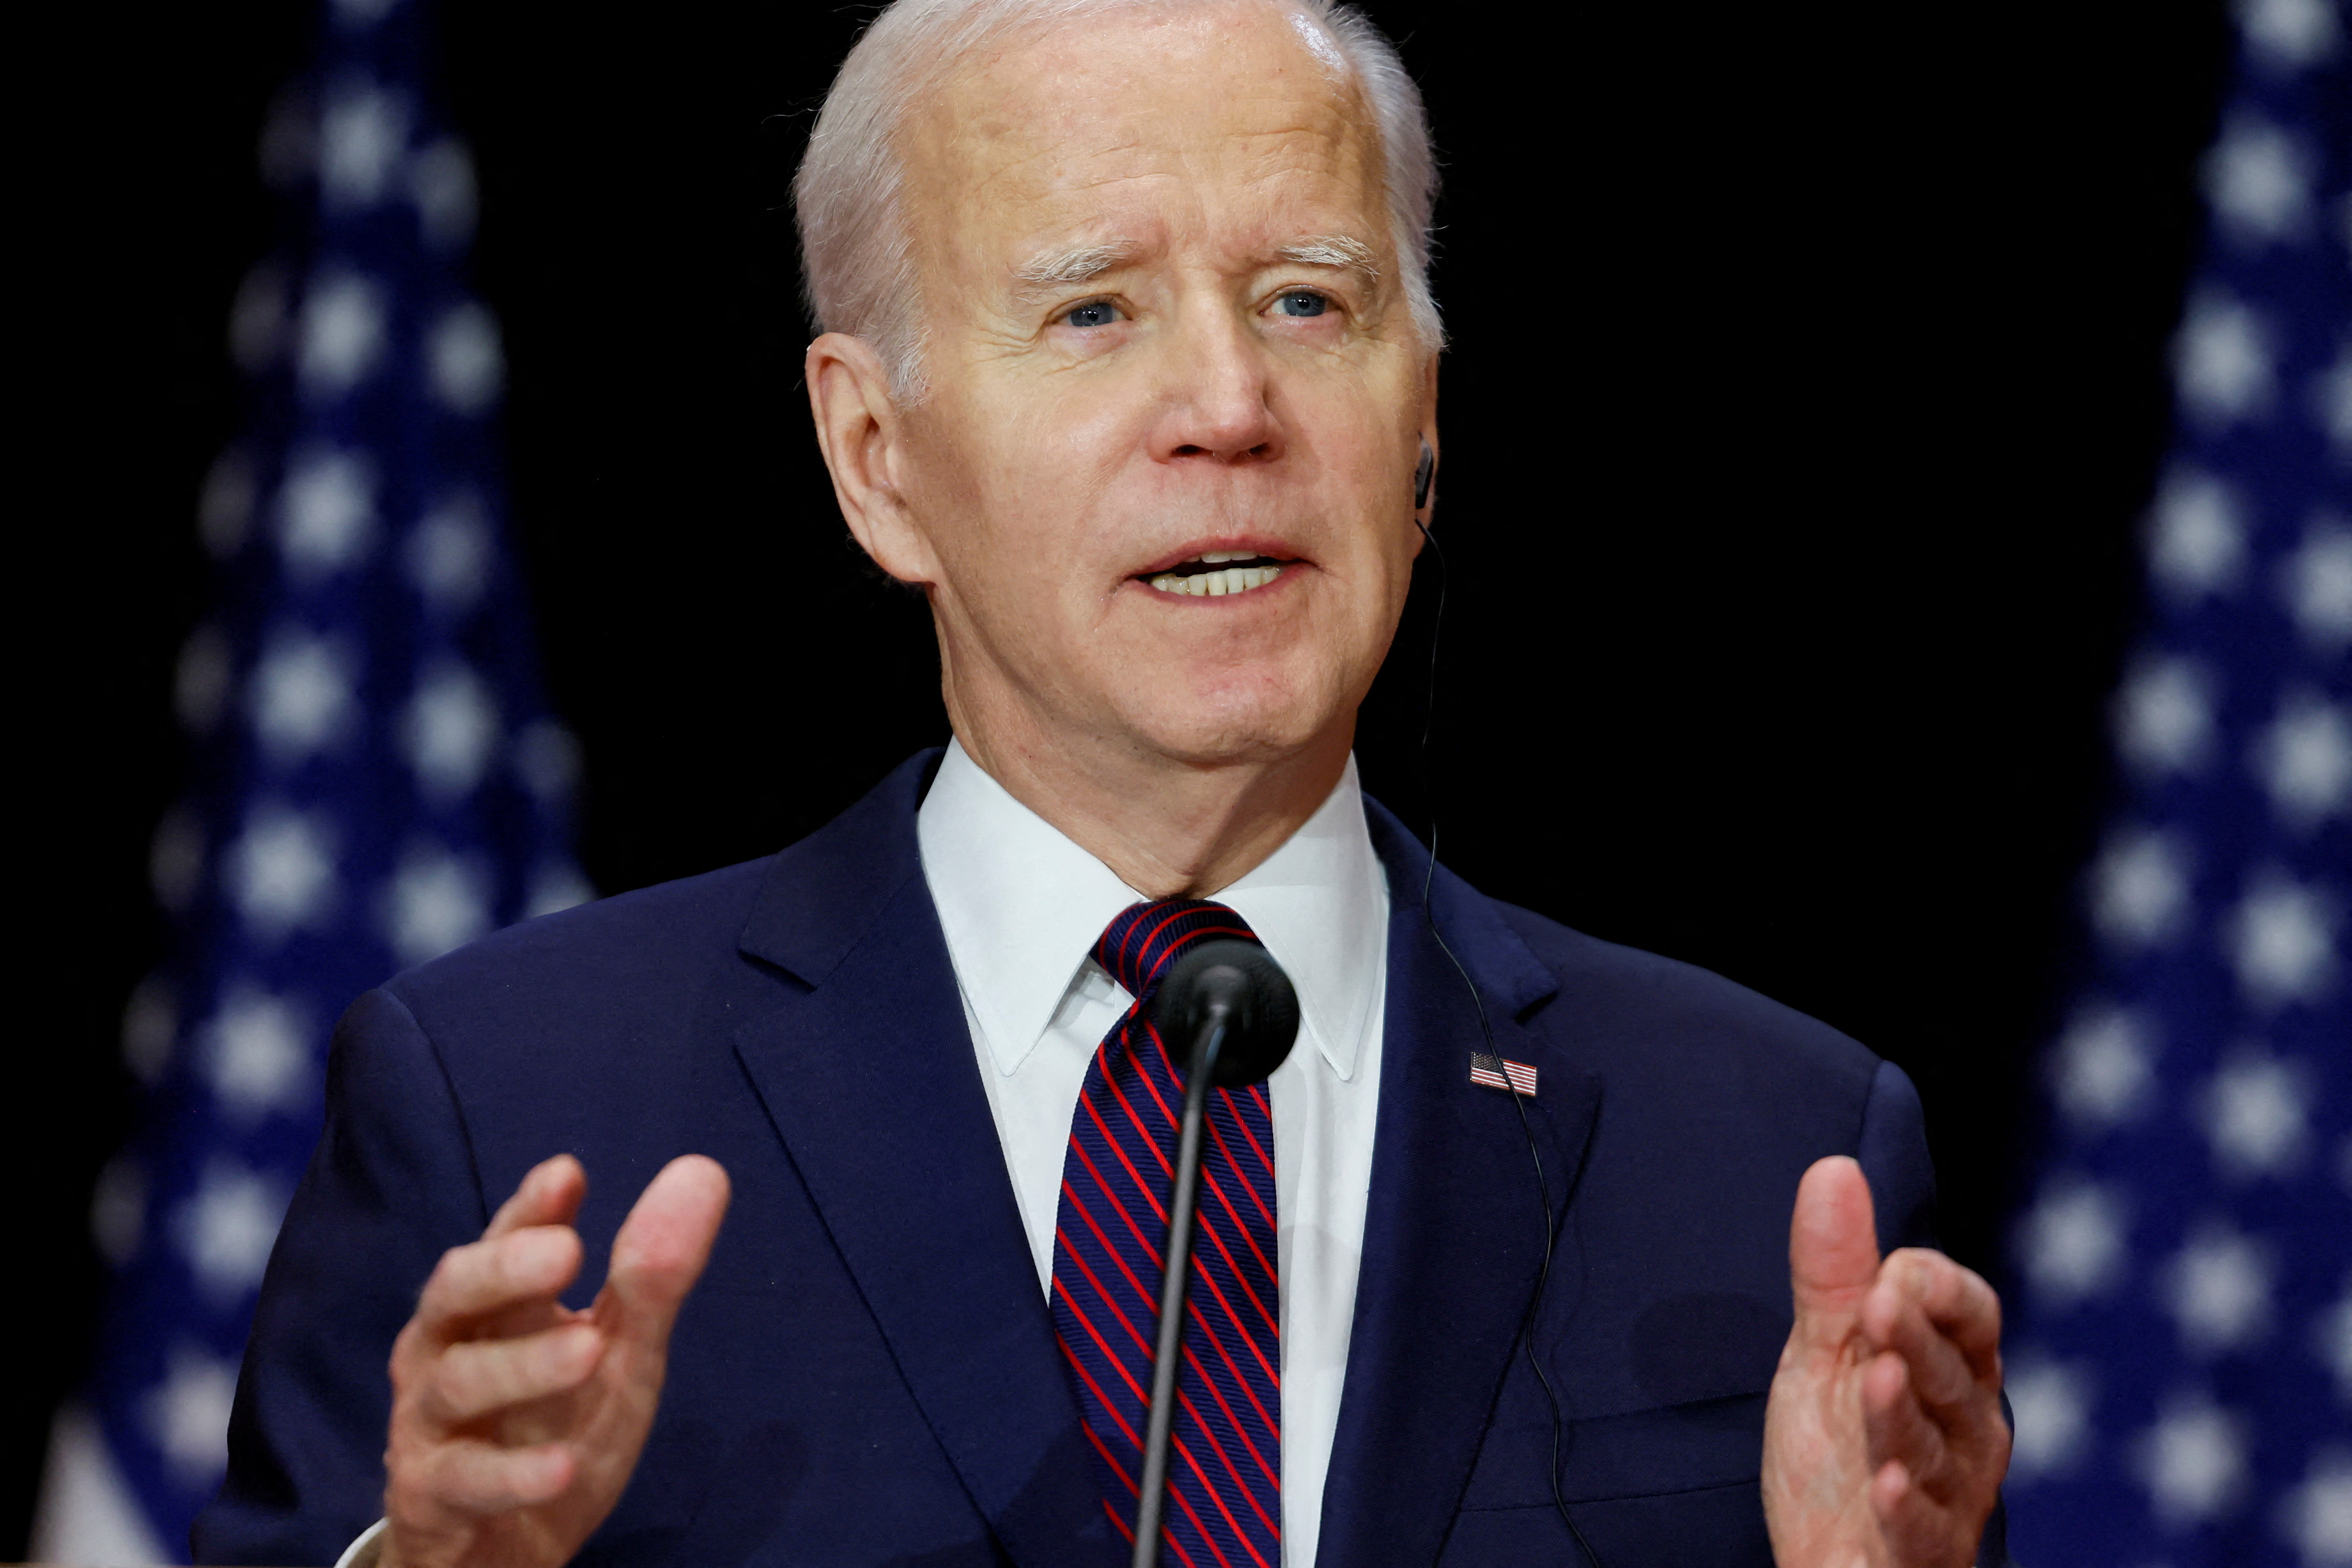 U.S. President Joe Biden says the sole purpose of his country's nuclear weapons arsenal is to deter attacks on the country. /Blair Gable/Reuters